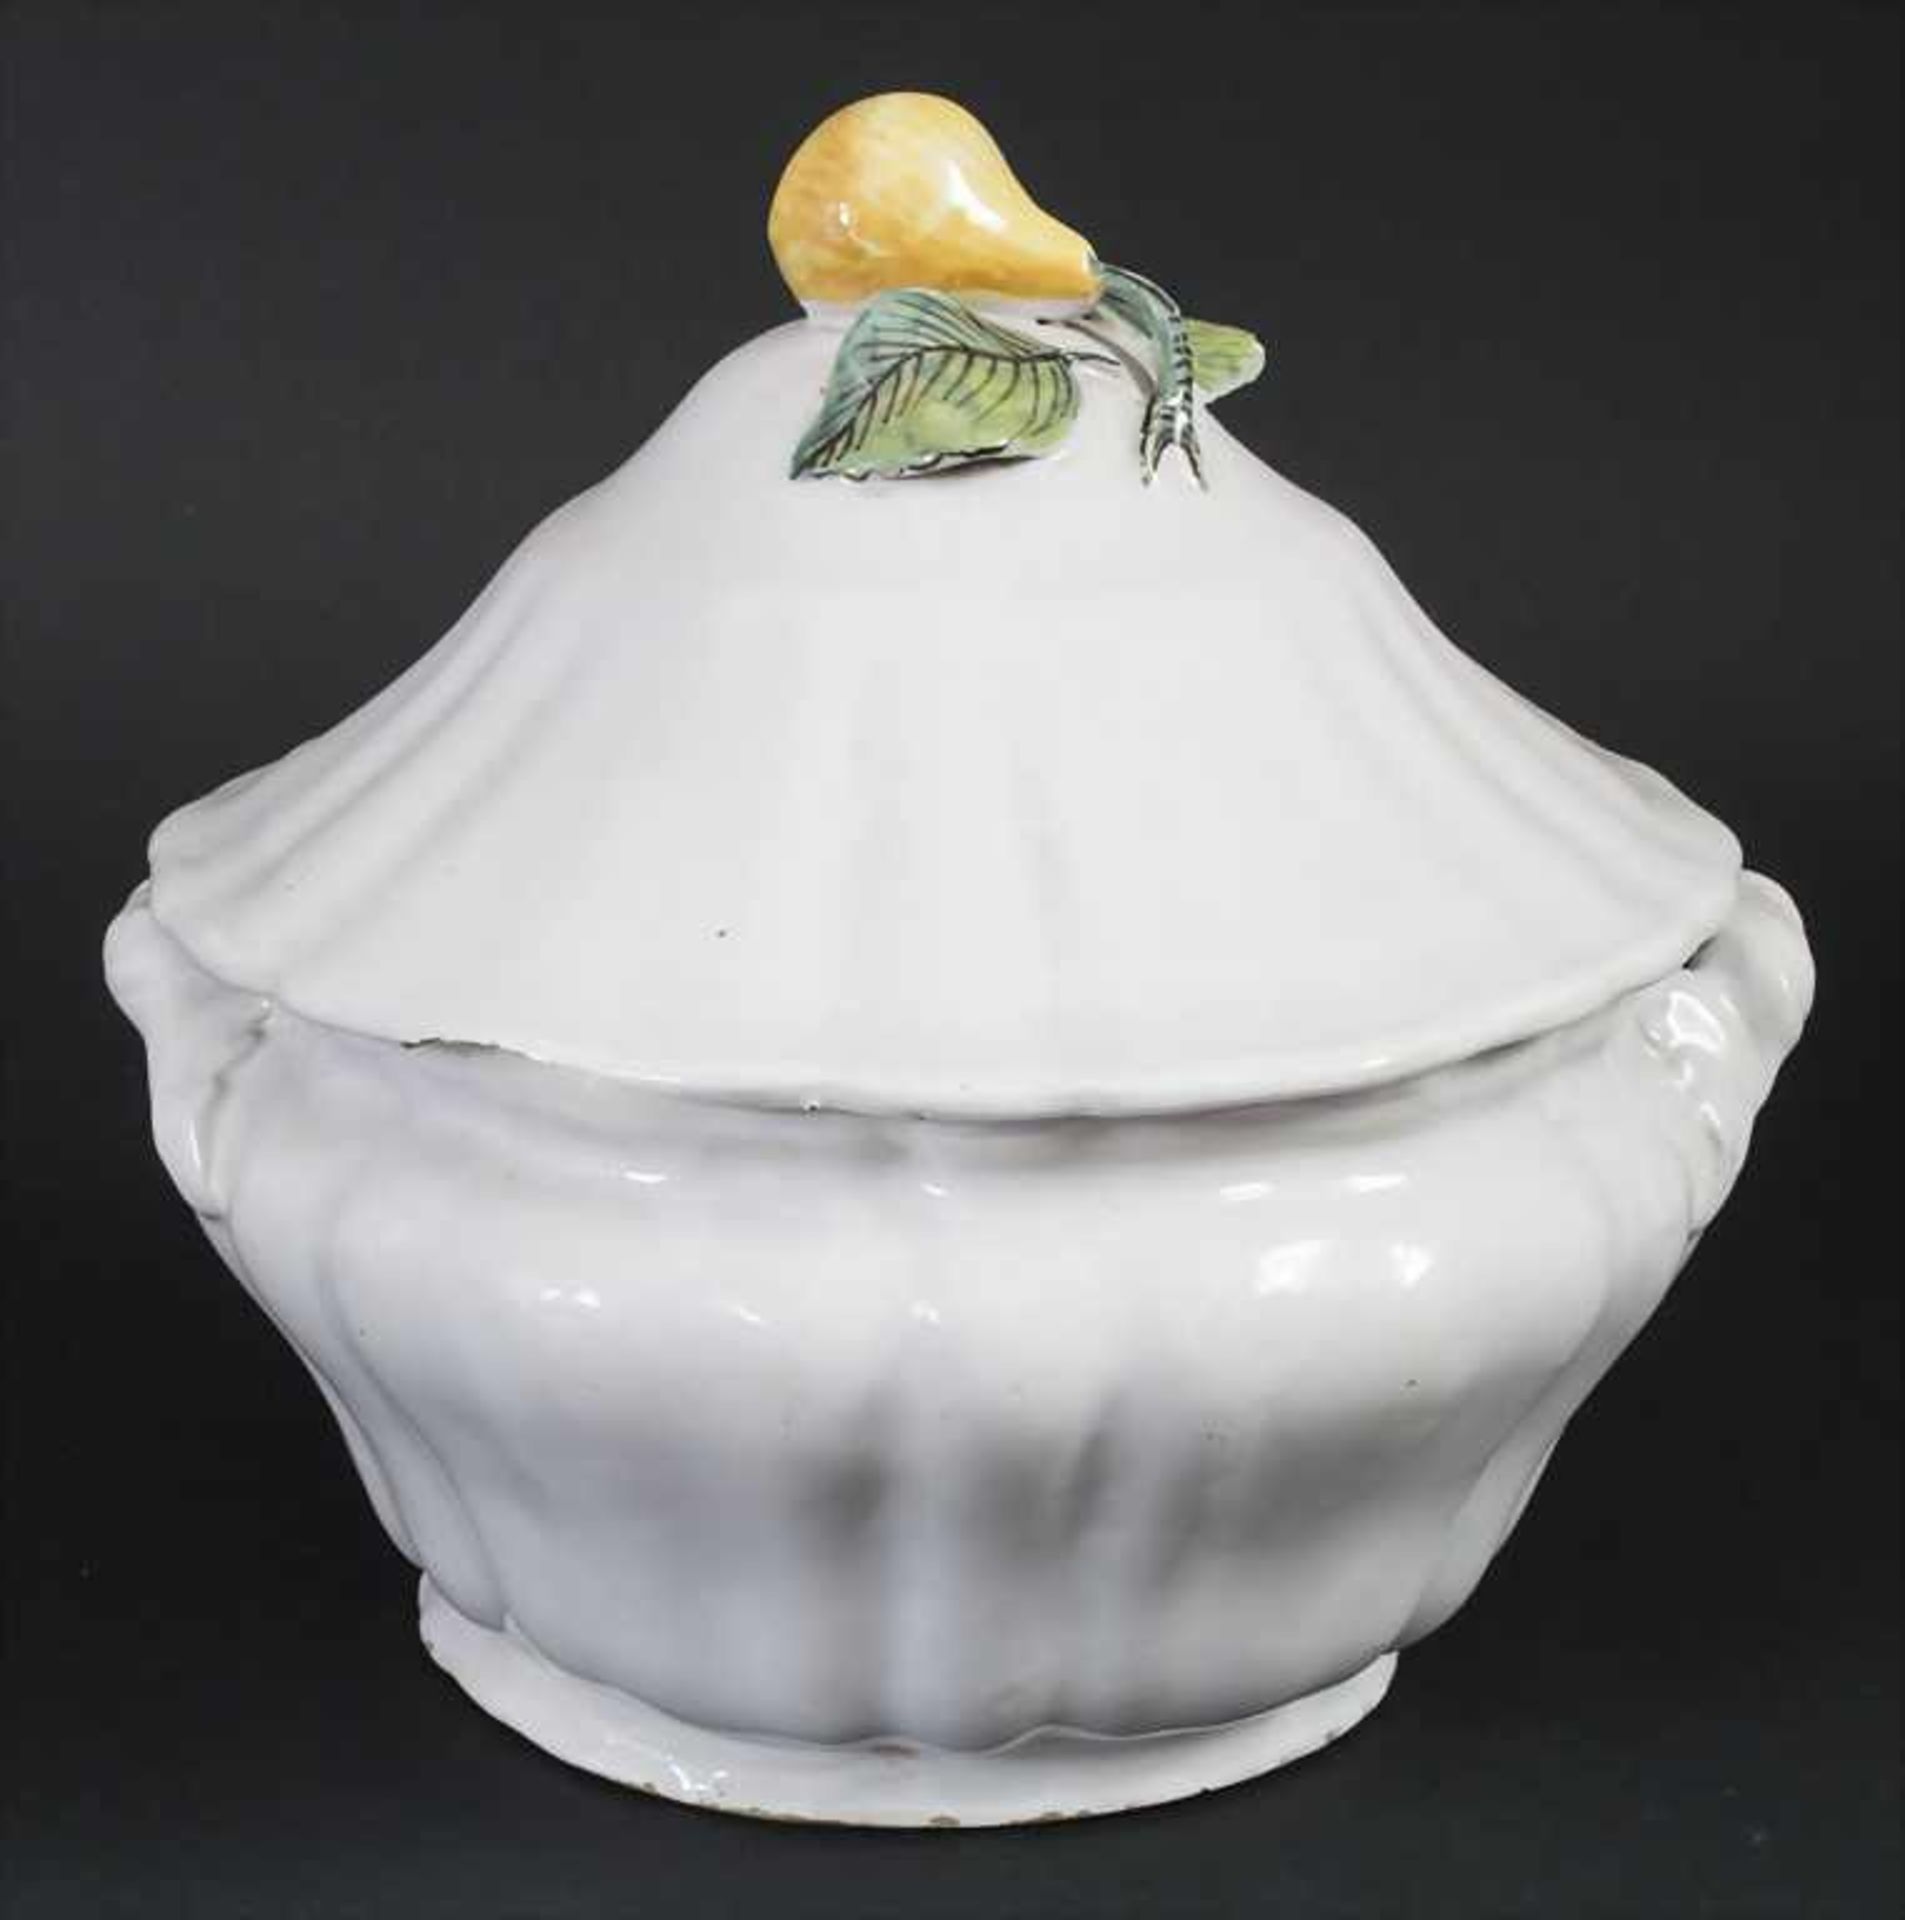 Fayence-Deckelterrine mit Birnknauf / A faience tureen and cover with pear knob, um 1800